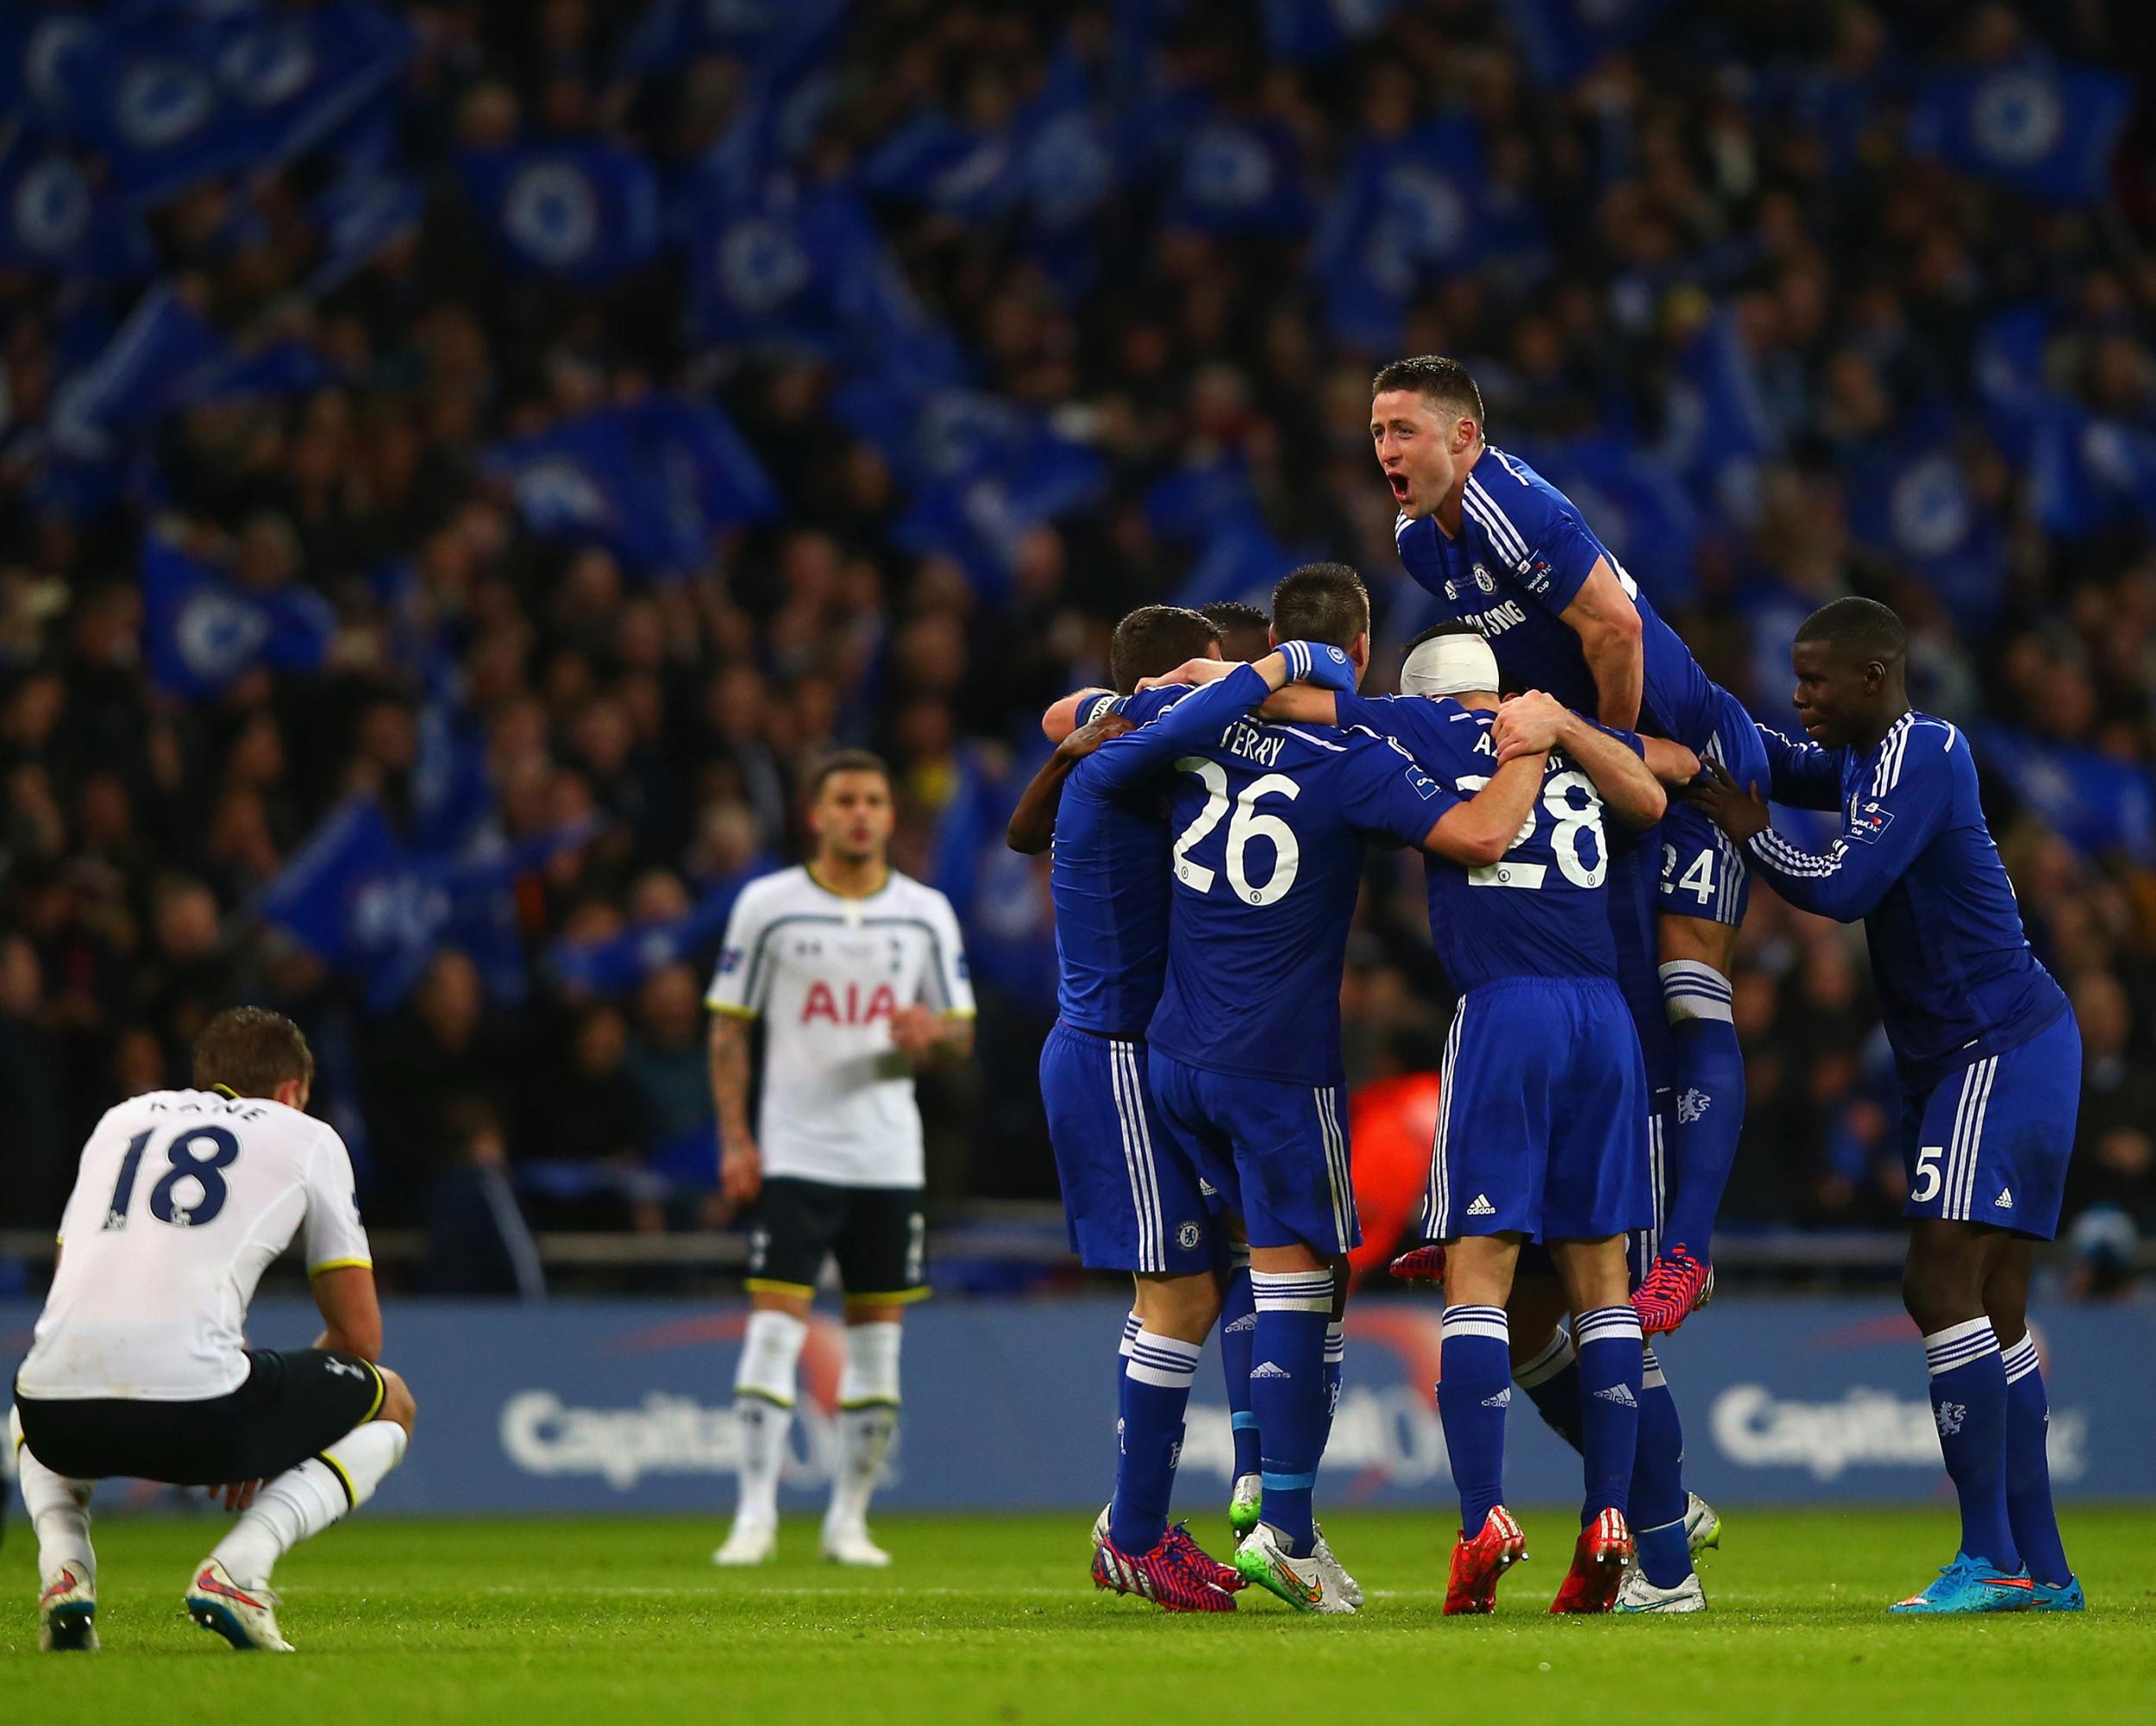 Chelsea won the League Cup at the expense of Spurs with a clinical performance